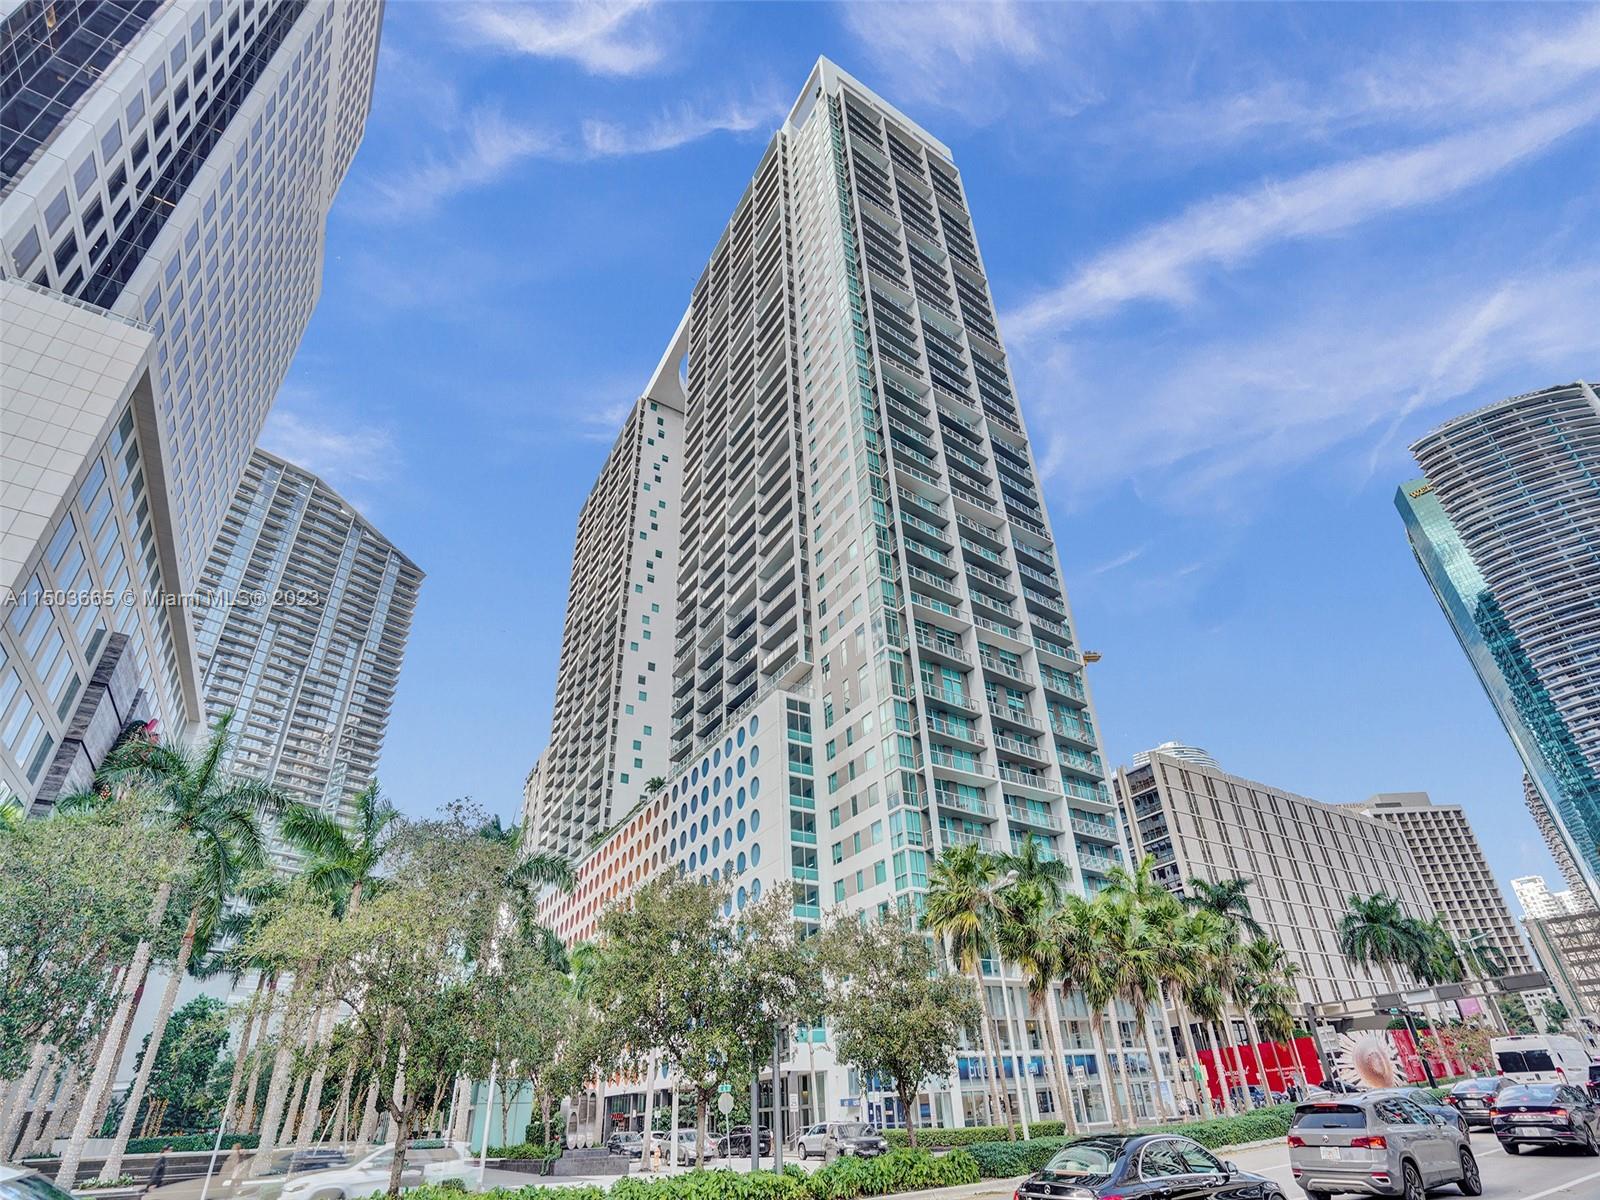 Beautiful 1-bedroom, 1-bathroom residence featuring stunning city and water views, centrally located in the heart of Brickell. Enjoy the convenience of walking to Brickell City Center mall, as well as a variety of restaurants, bars, coffee shops, and nightlife destinations.
This unit boasts wood like floors throughout, stainless steel appliances, and the added luxury of 24/7 concierge and security services. Indulge in spectacular amenities such as a well-equipped gym, pool, relaxing sauna, and clubroom. In addition, a rooftop heated pool with breathtaking views on the 42nd floor. Experience the epitome of urban living in this chic and well-appointed residence.